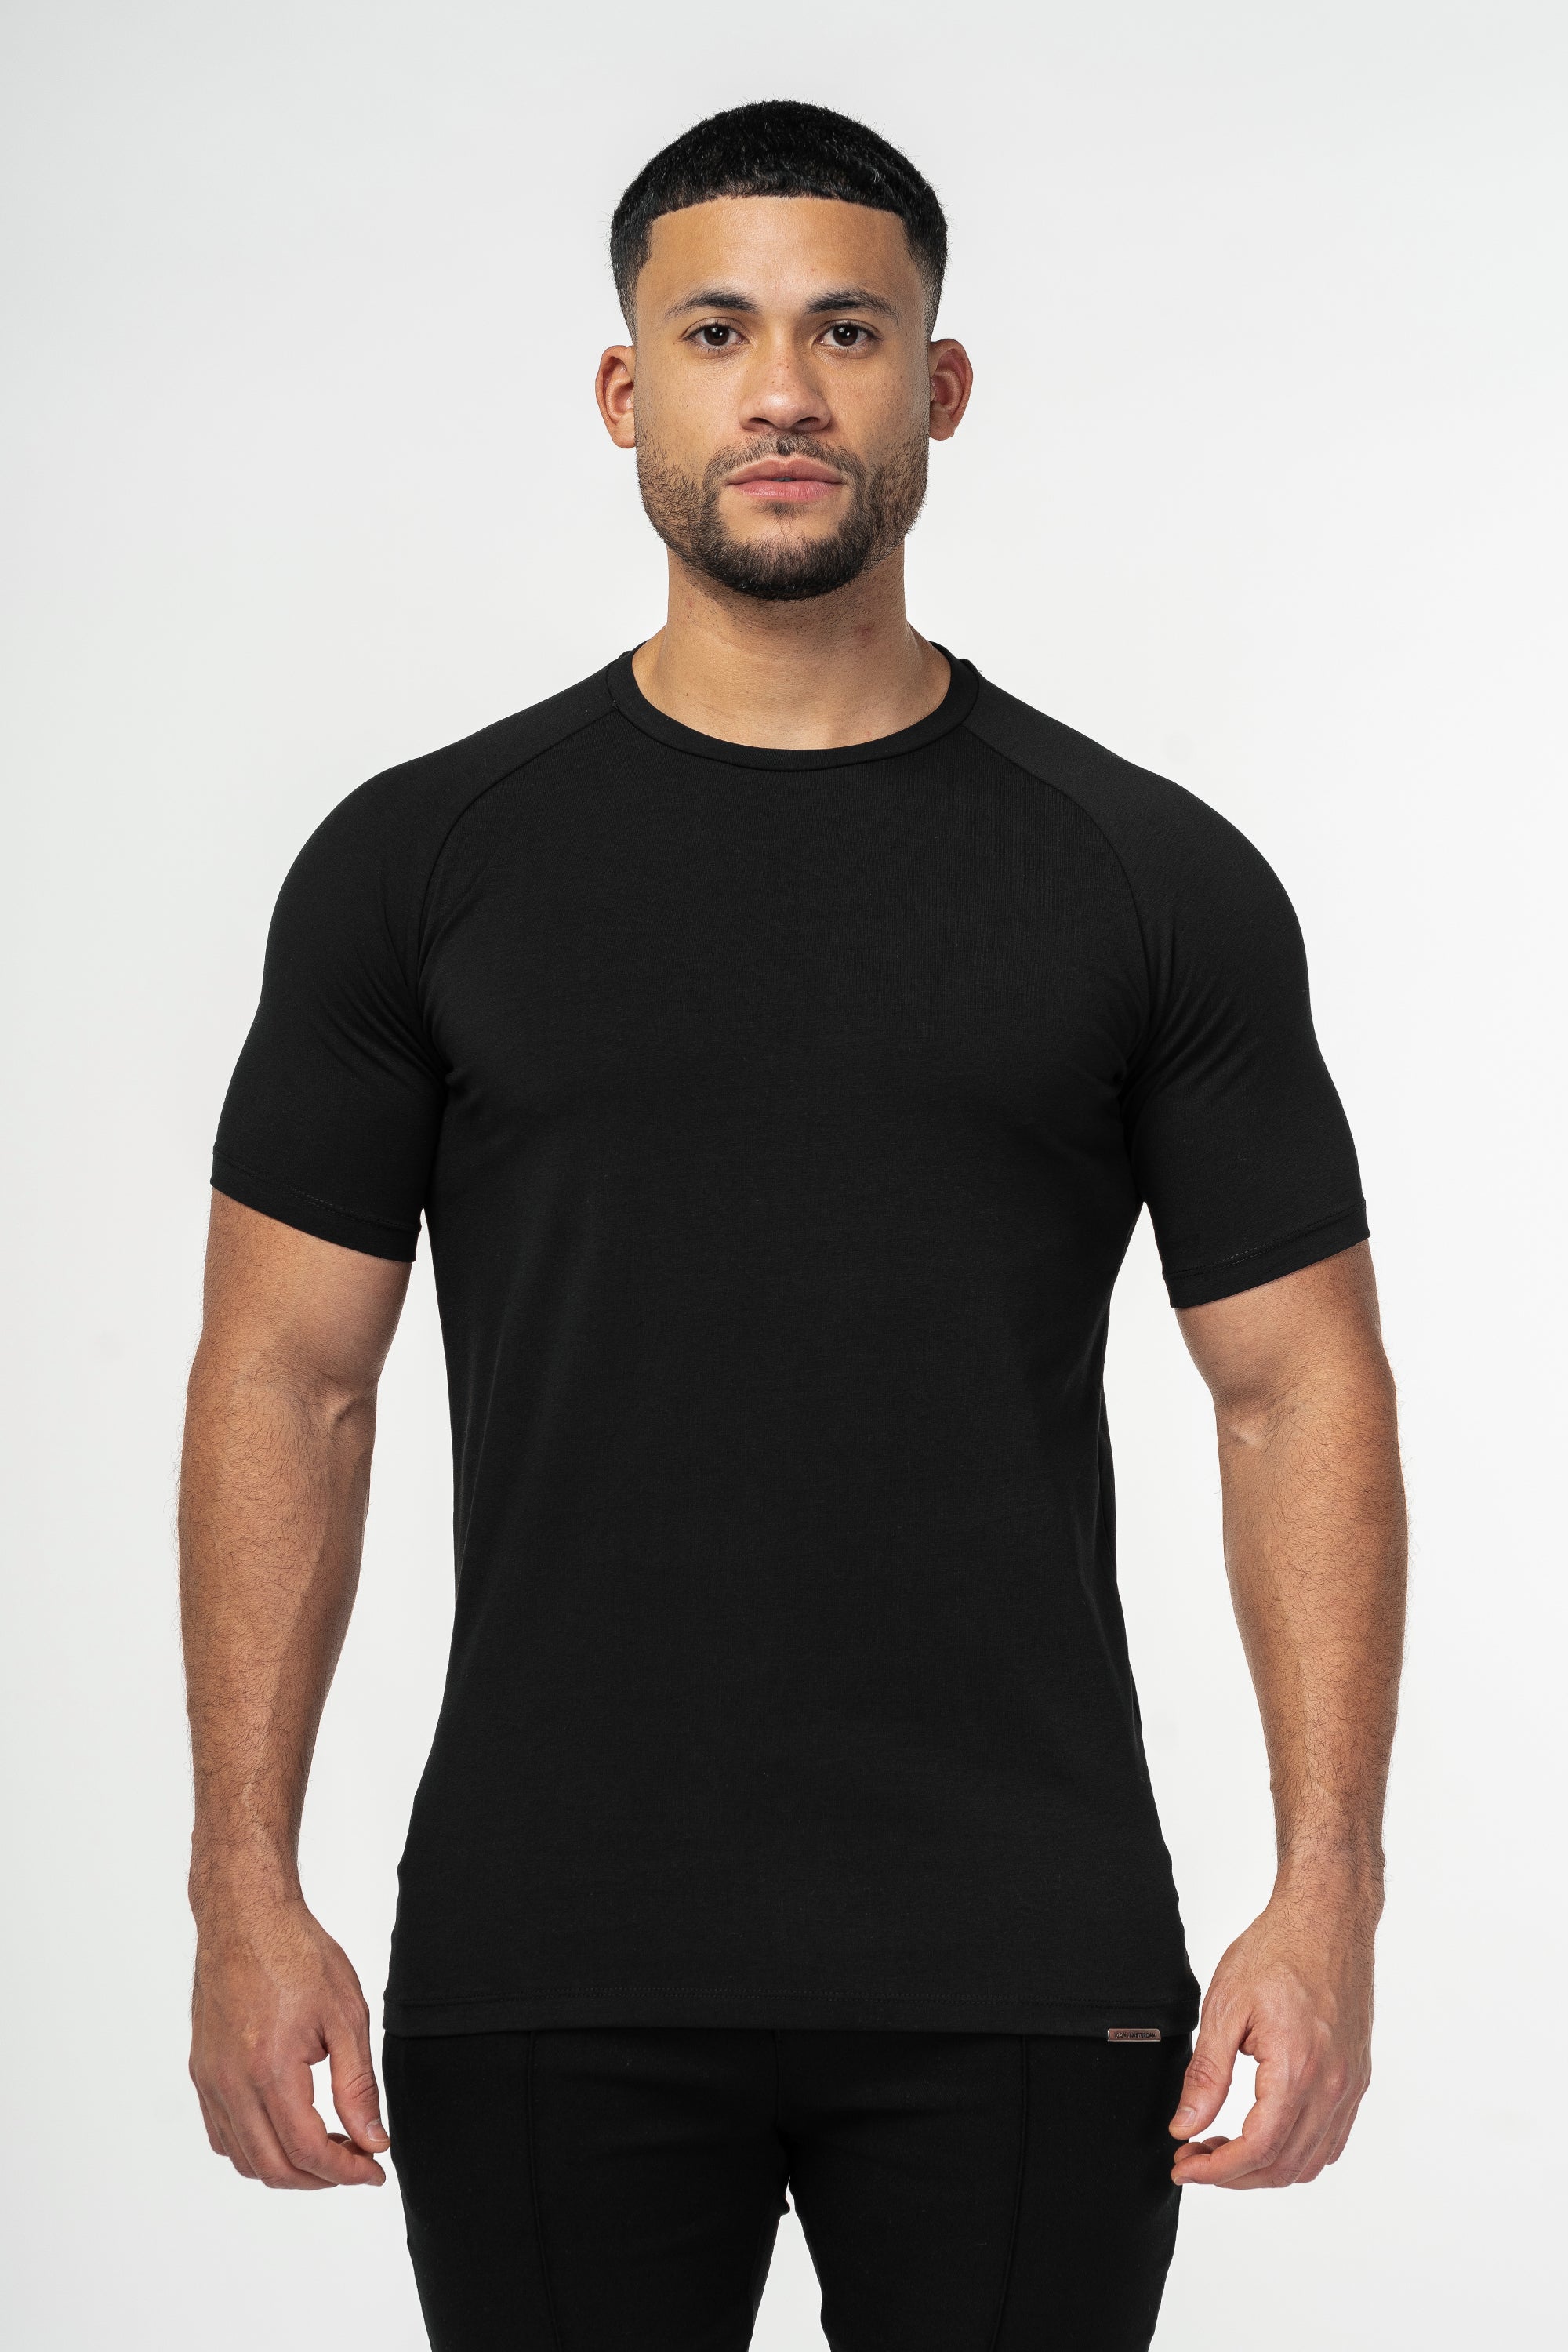 THE MUSCLE BASIC T-SHIRT - BLACK - ICON. AMSTERDAM